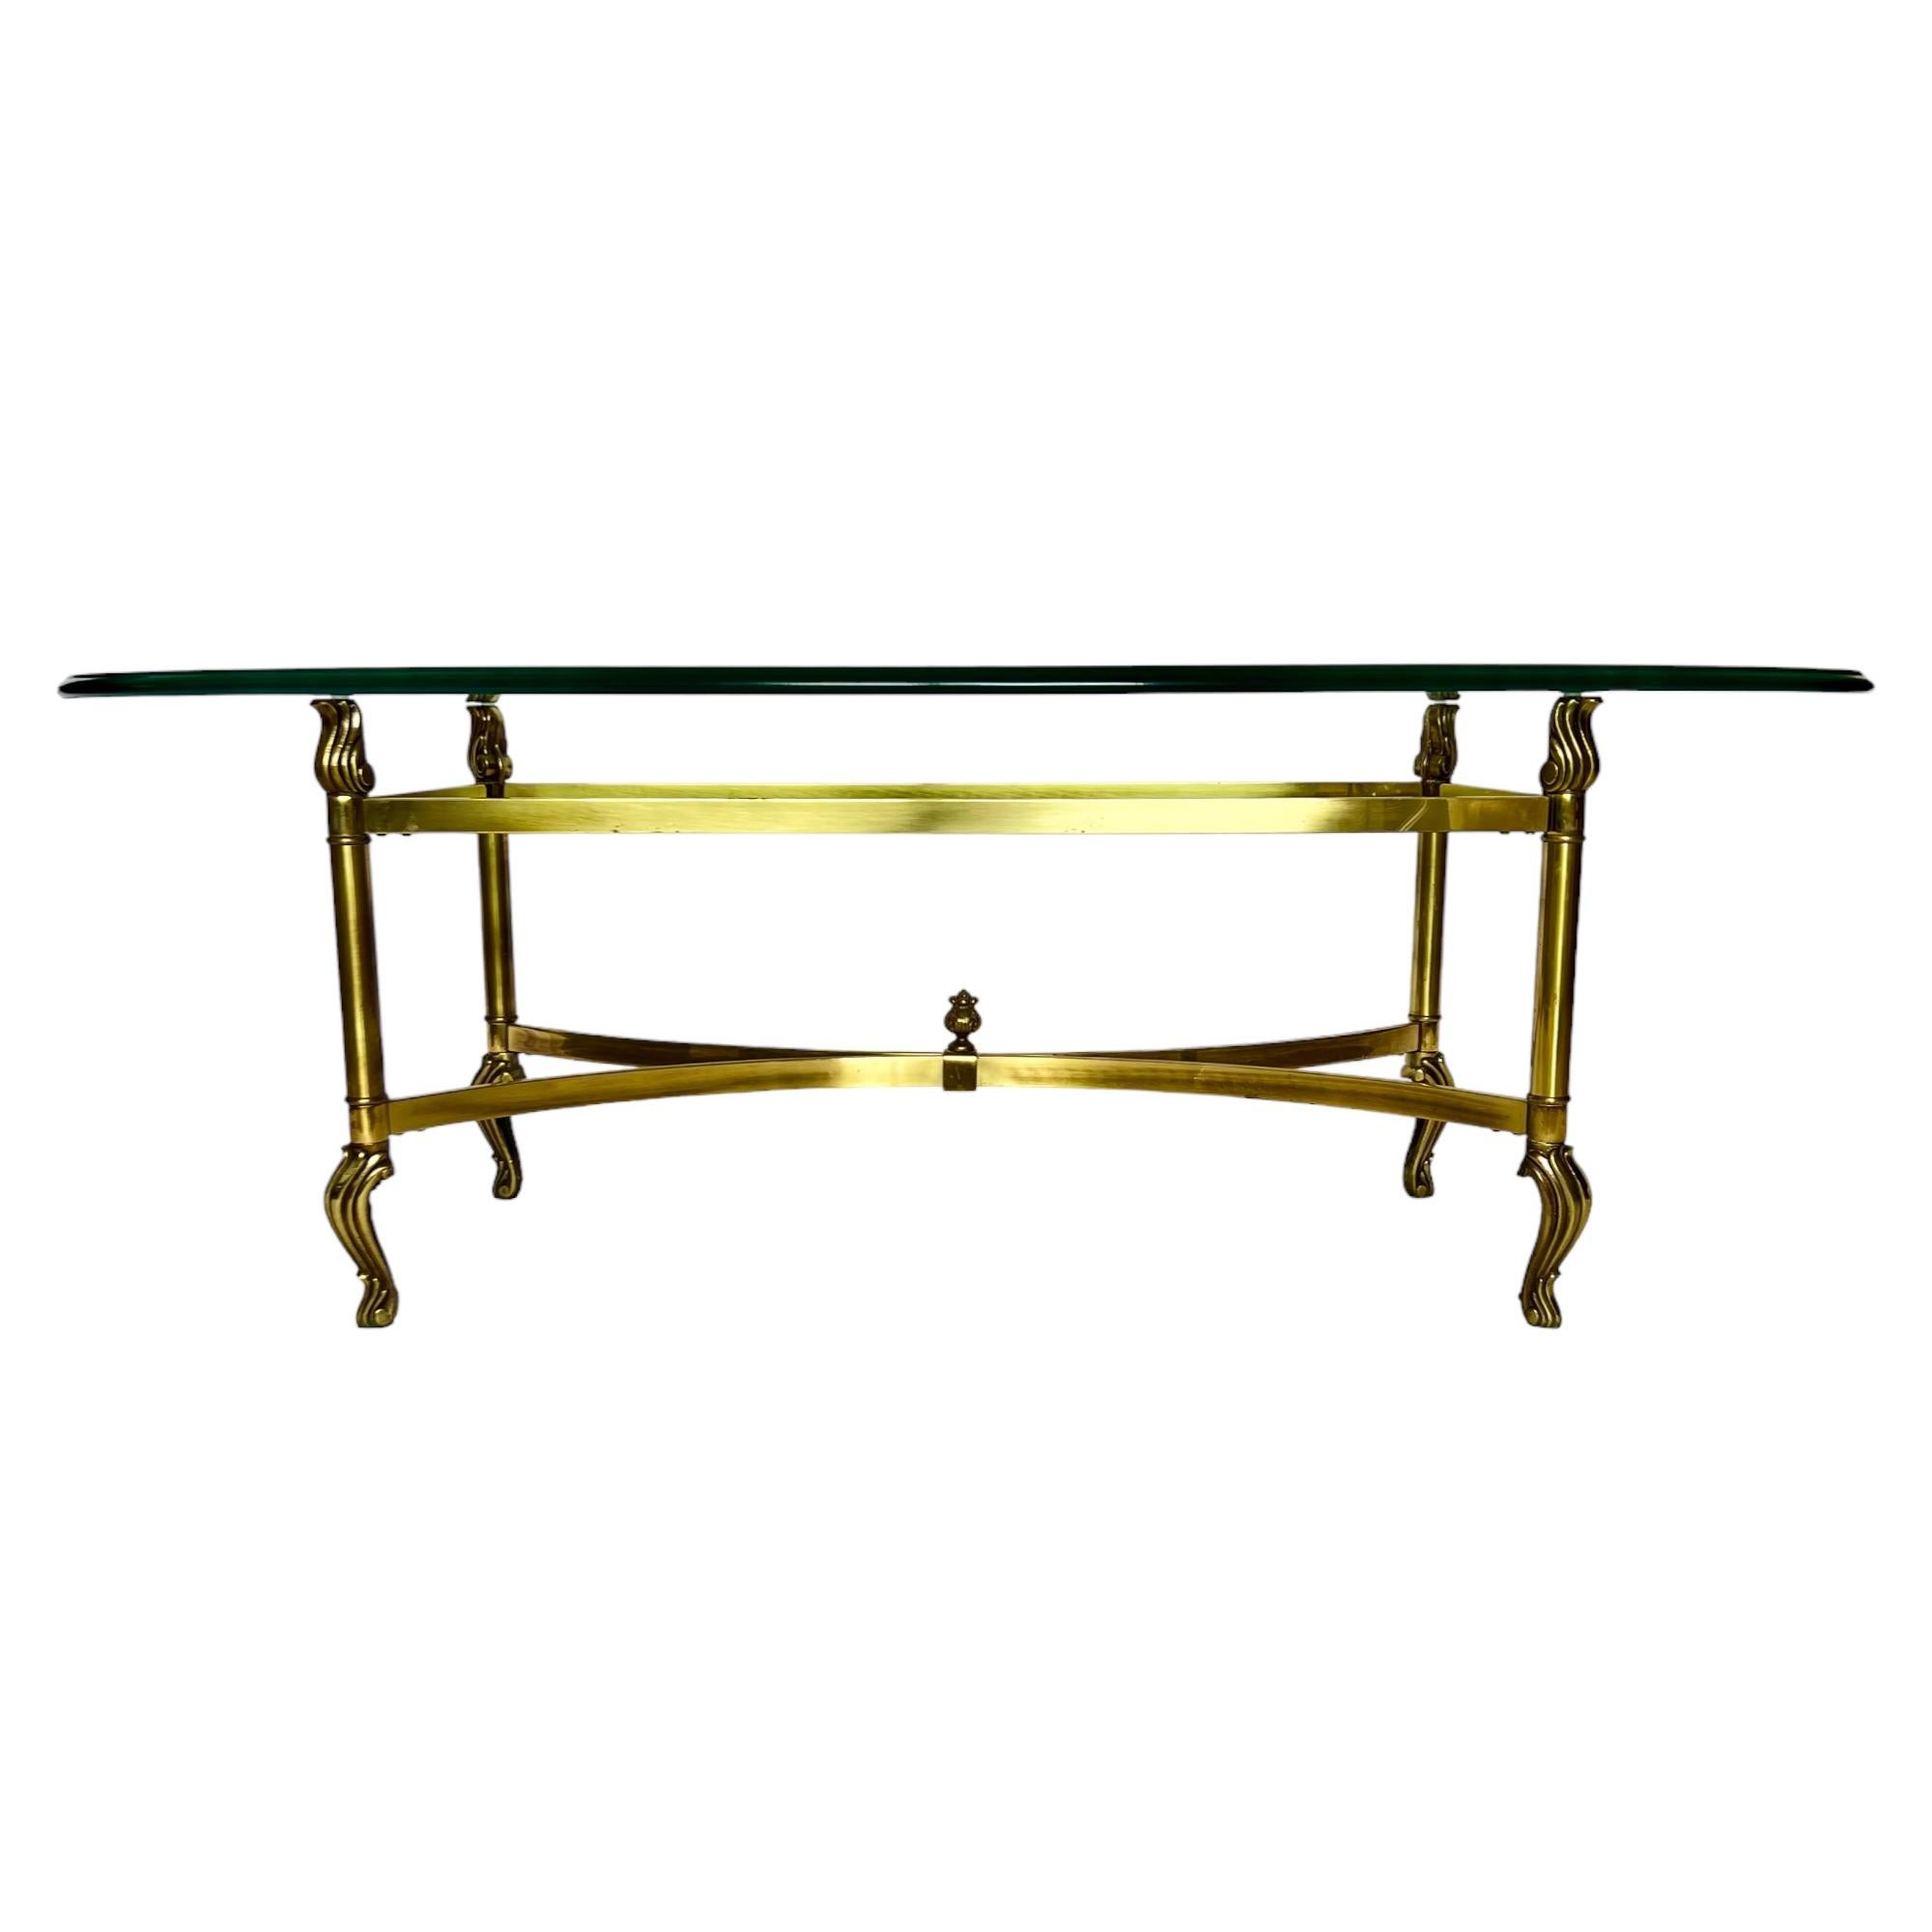 A vintage late 20th century Hollywood Regency style brass cocktail table with an oval beveled edge glass top surface of approximately 3/4 inch thickness.

Dimensions: 49.5